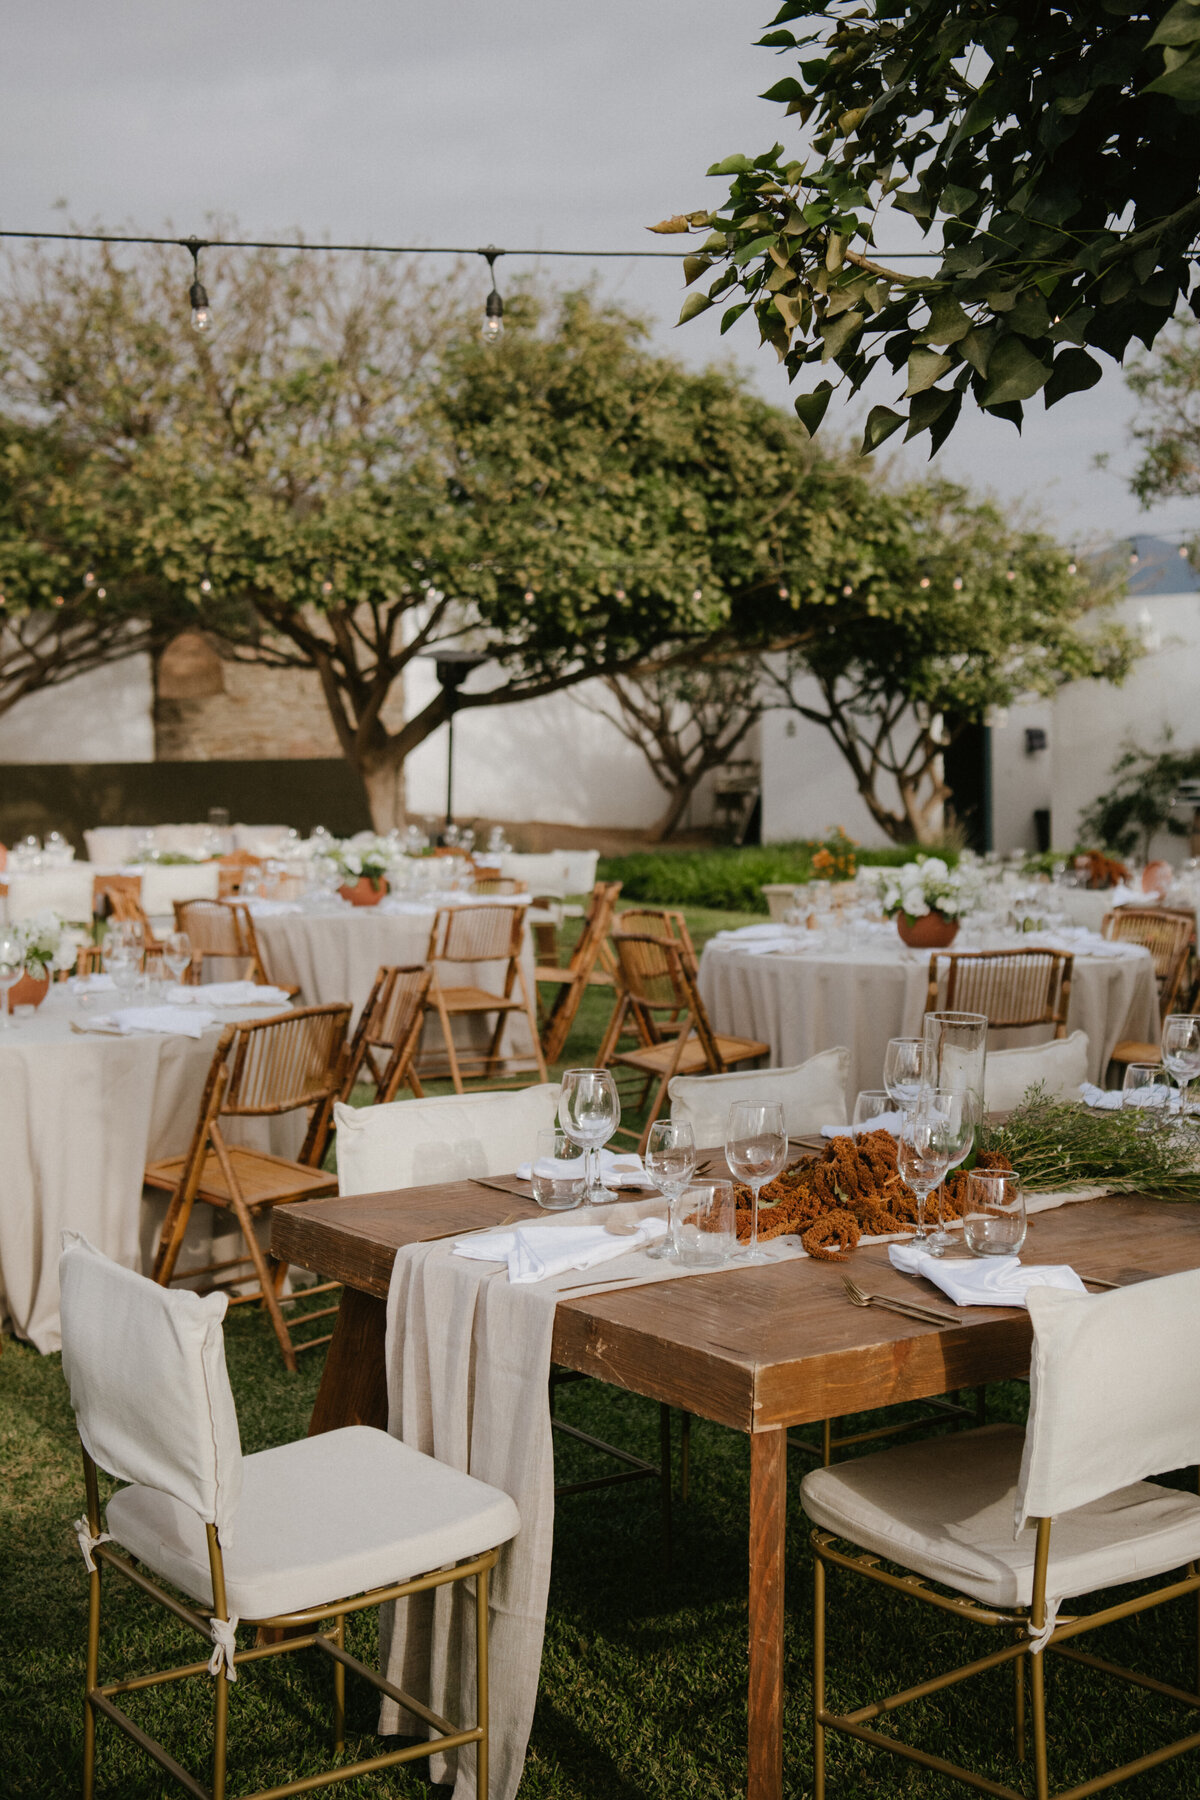 Creative table settings in valle de guadalupe mexico